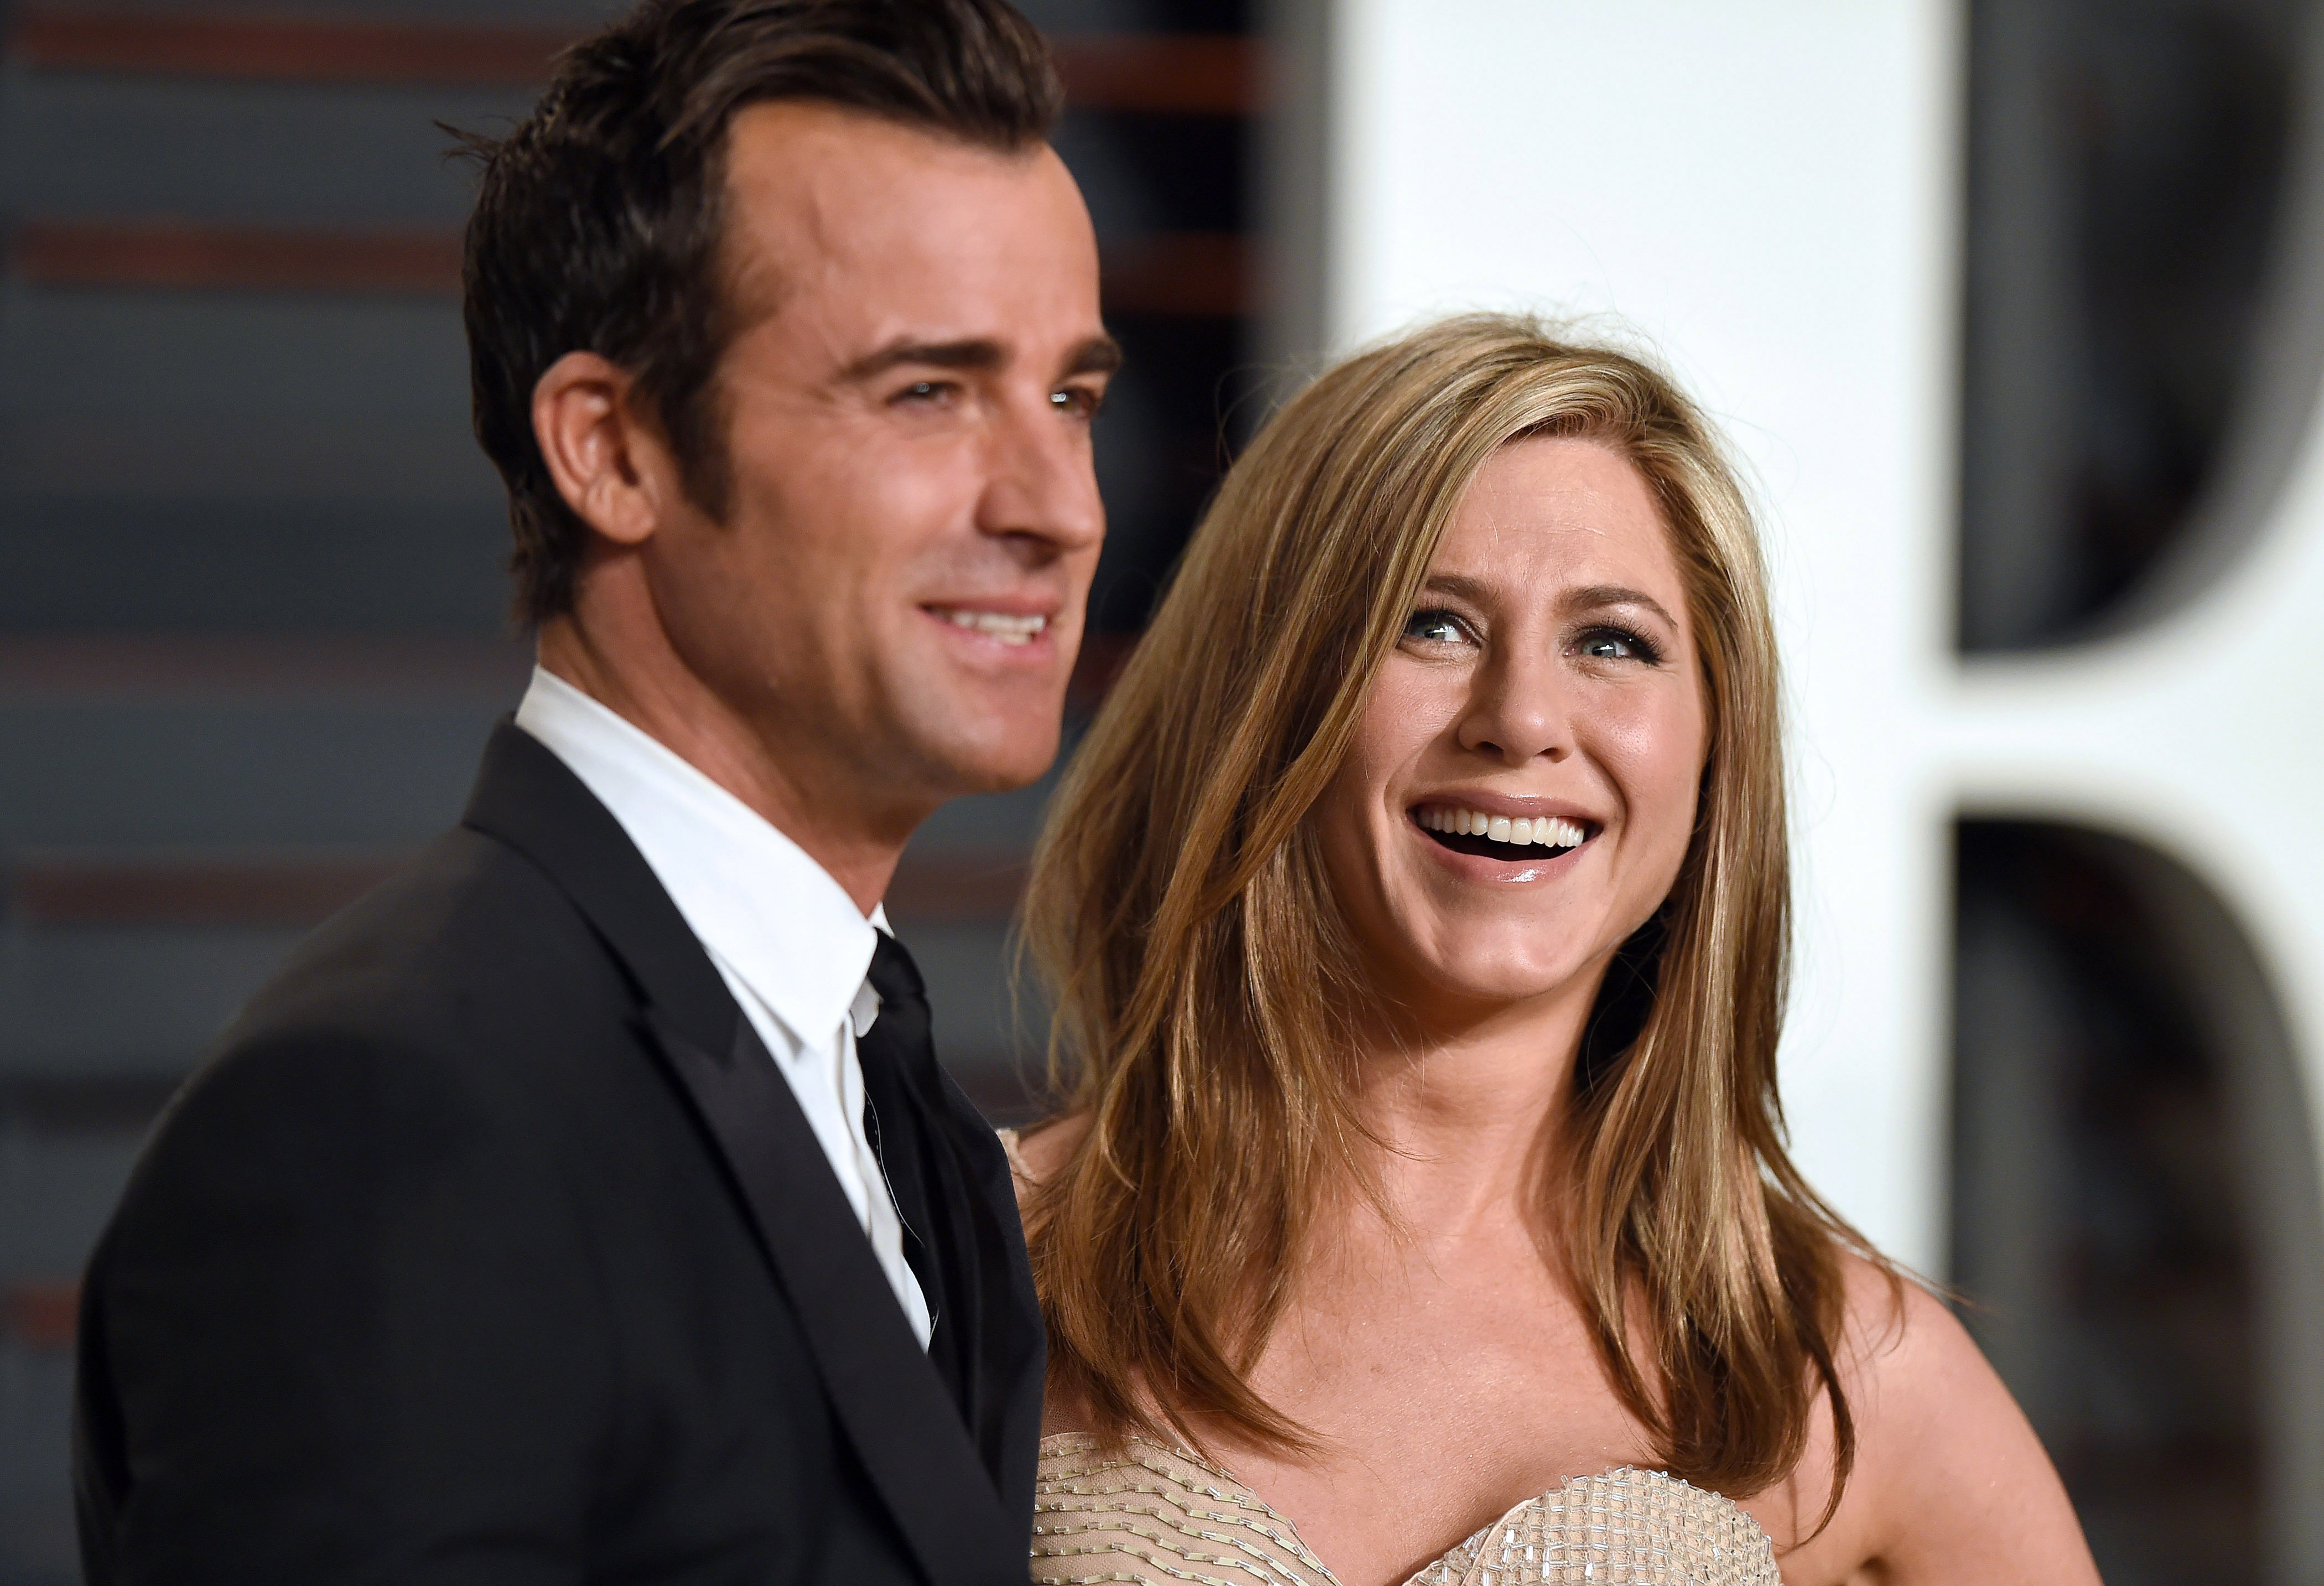 Actor Justin Theroux and Jennifer Aniston arrive at the 2015 Vanity Fair Oscar Party at Wallis Annenberg Center for the Performing Arts on February 22, 2015 in Beverly Hills, California ┃Source: Getty Images